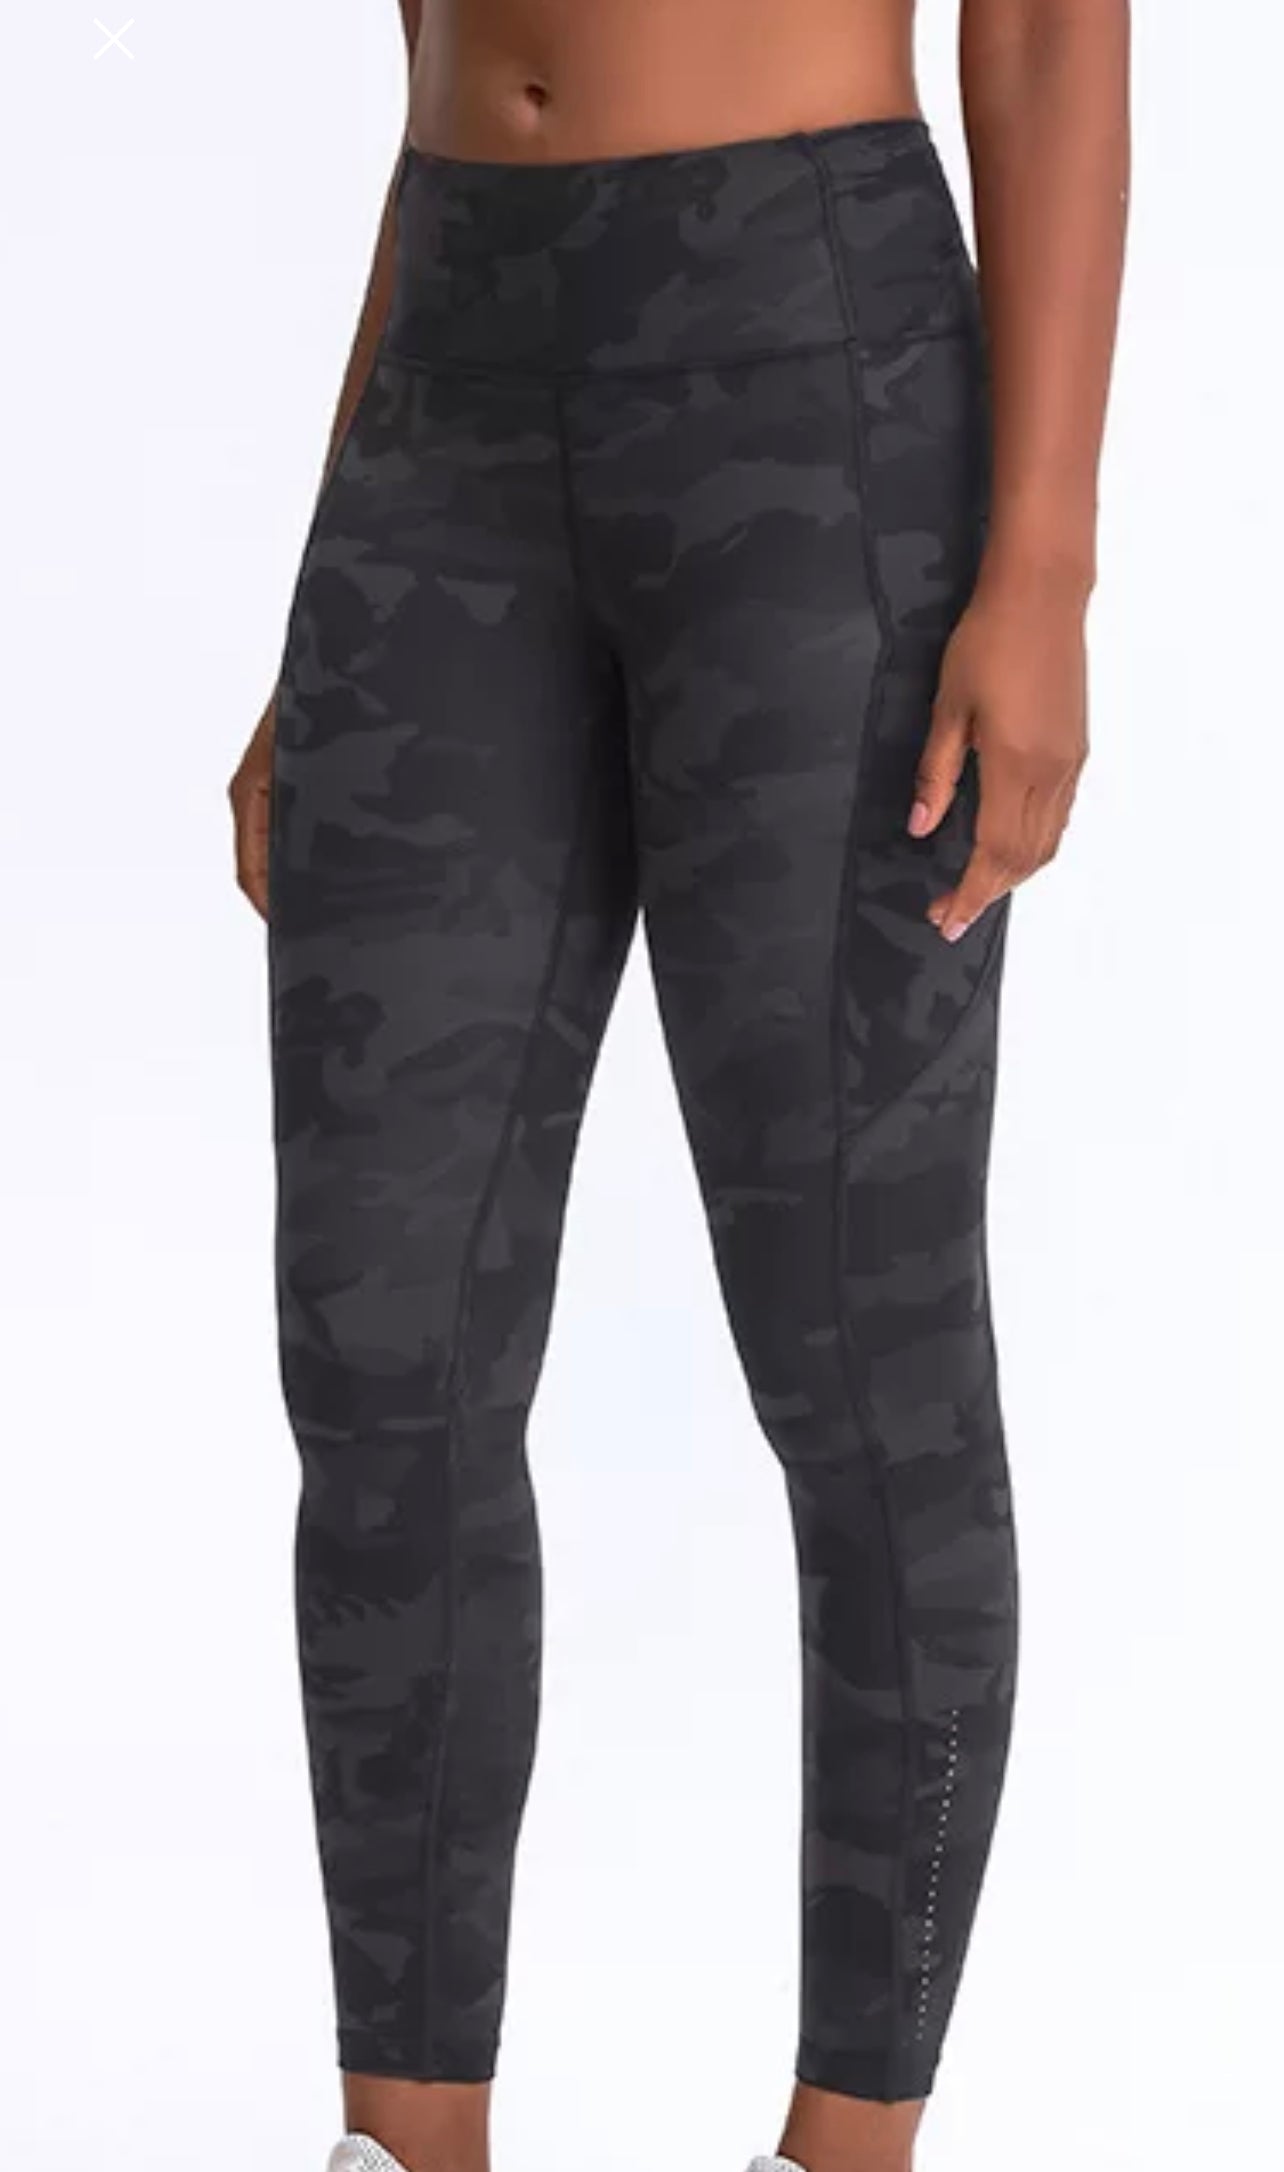 Presley Leggings with pockets